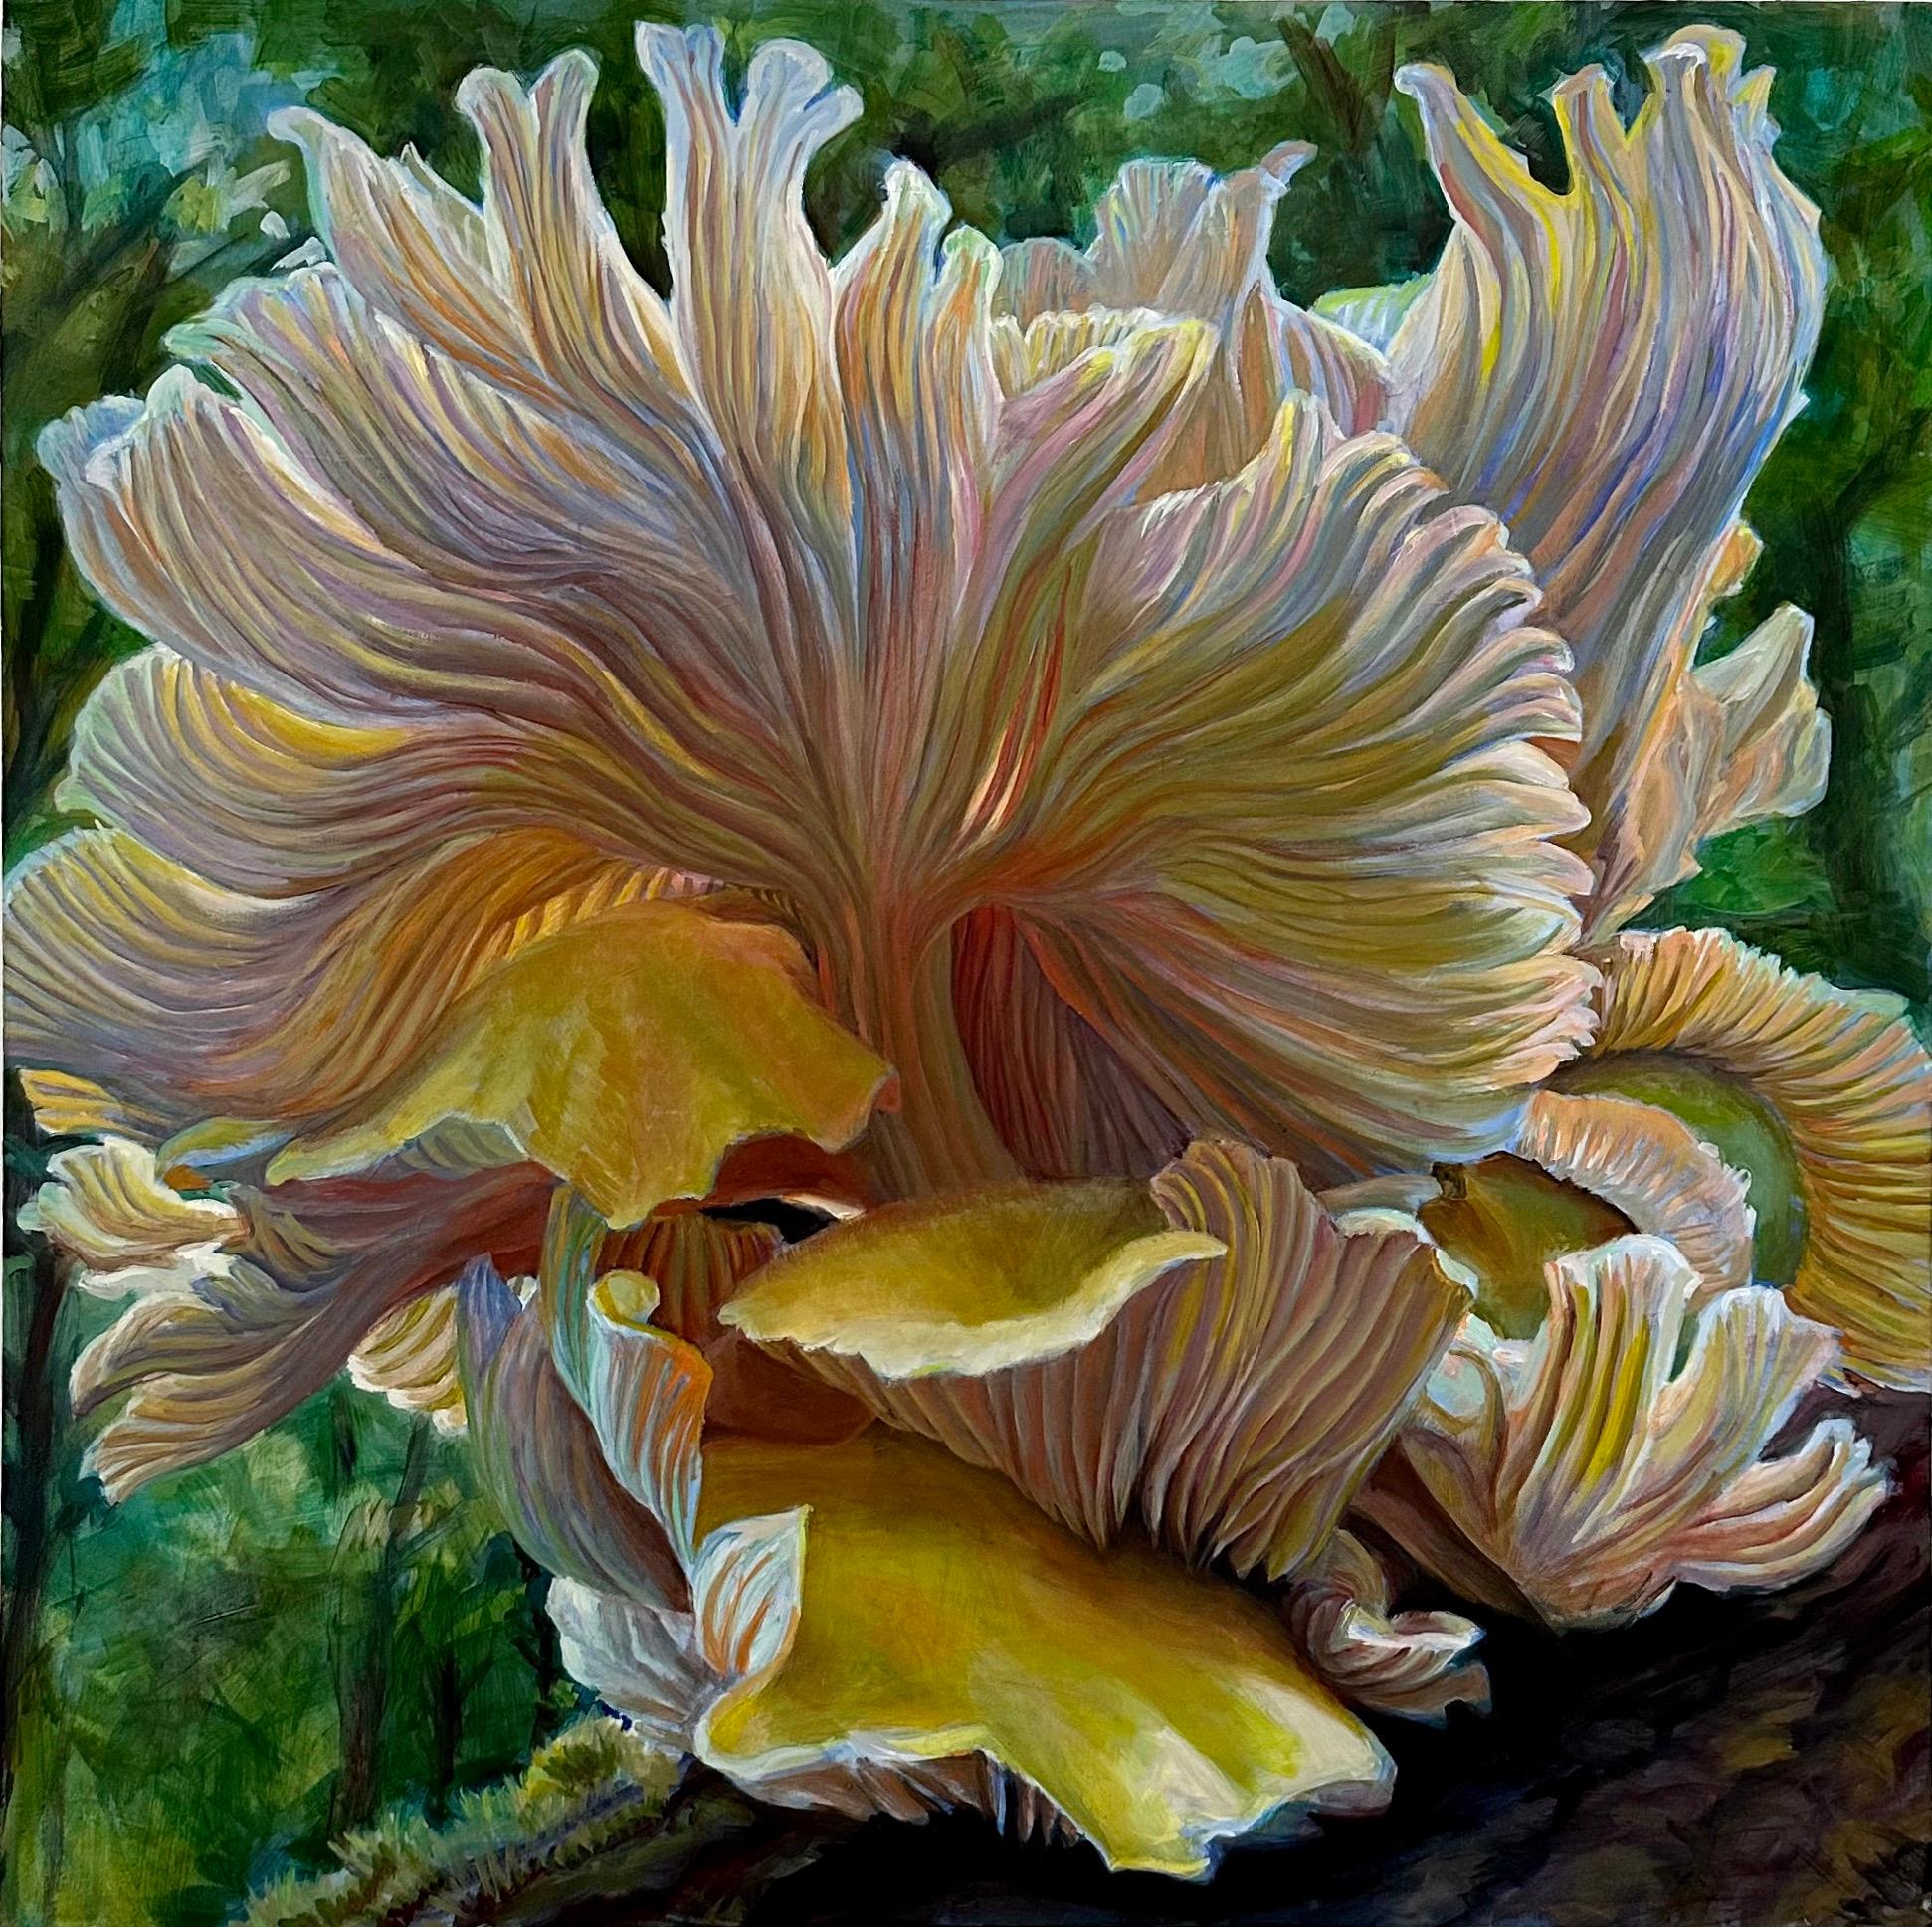 Andrea Kantrowitz Still-Life Painting - Golden Oysters One, Mushroom Fungi Still Life Painting, Yellow, Peach, Green